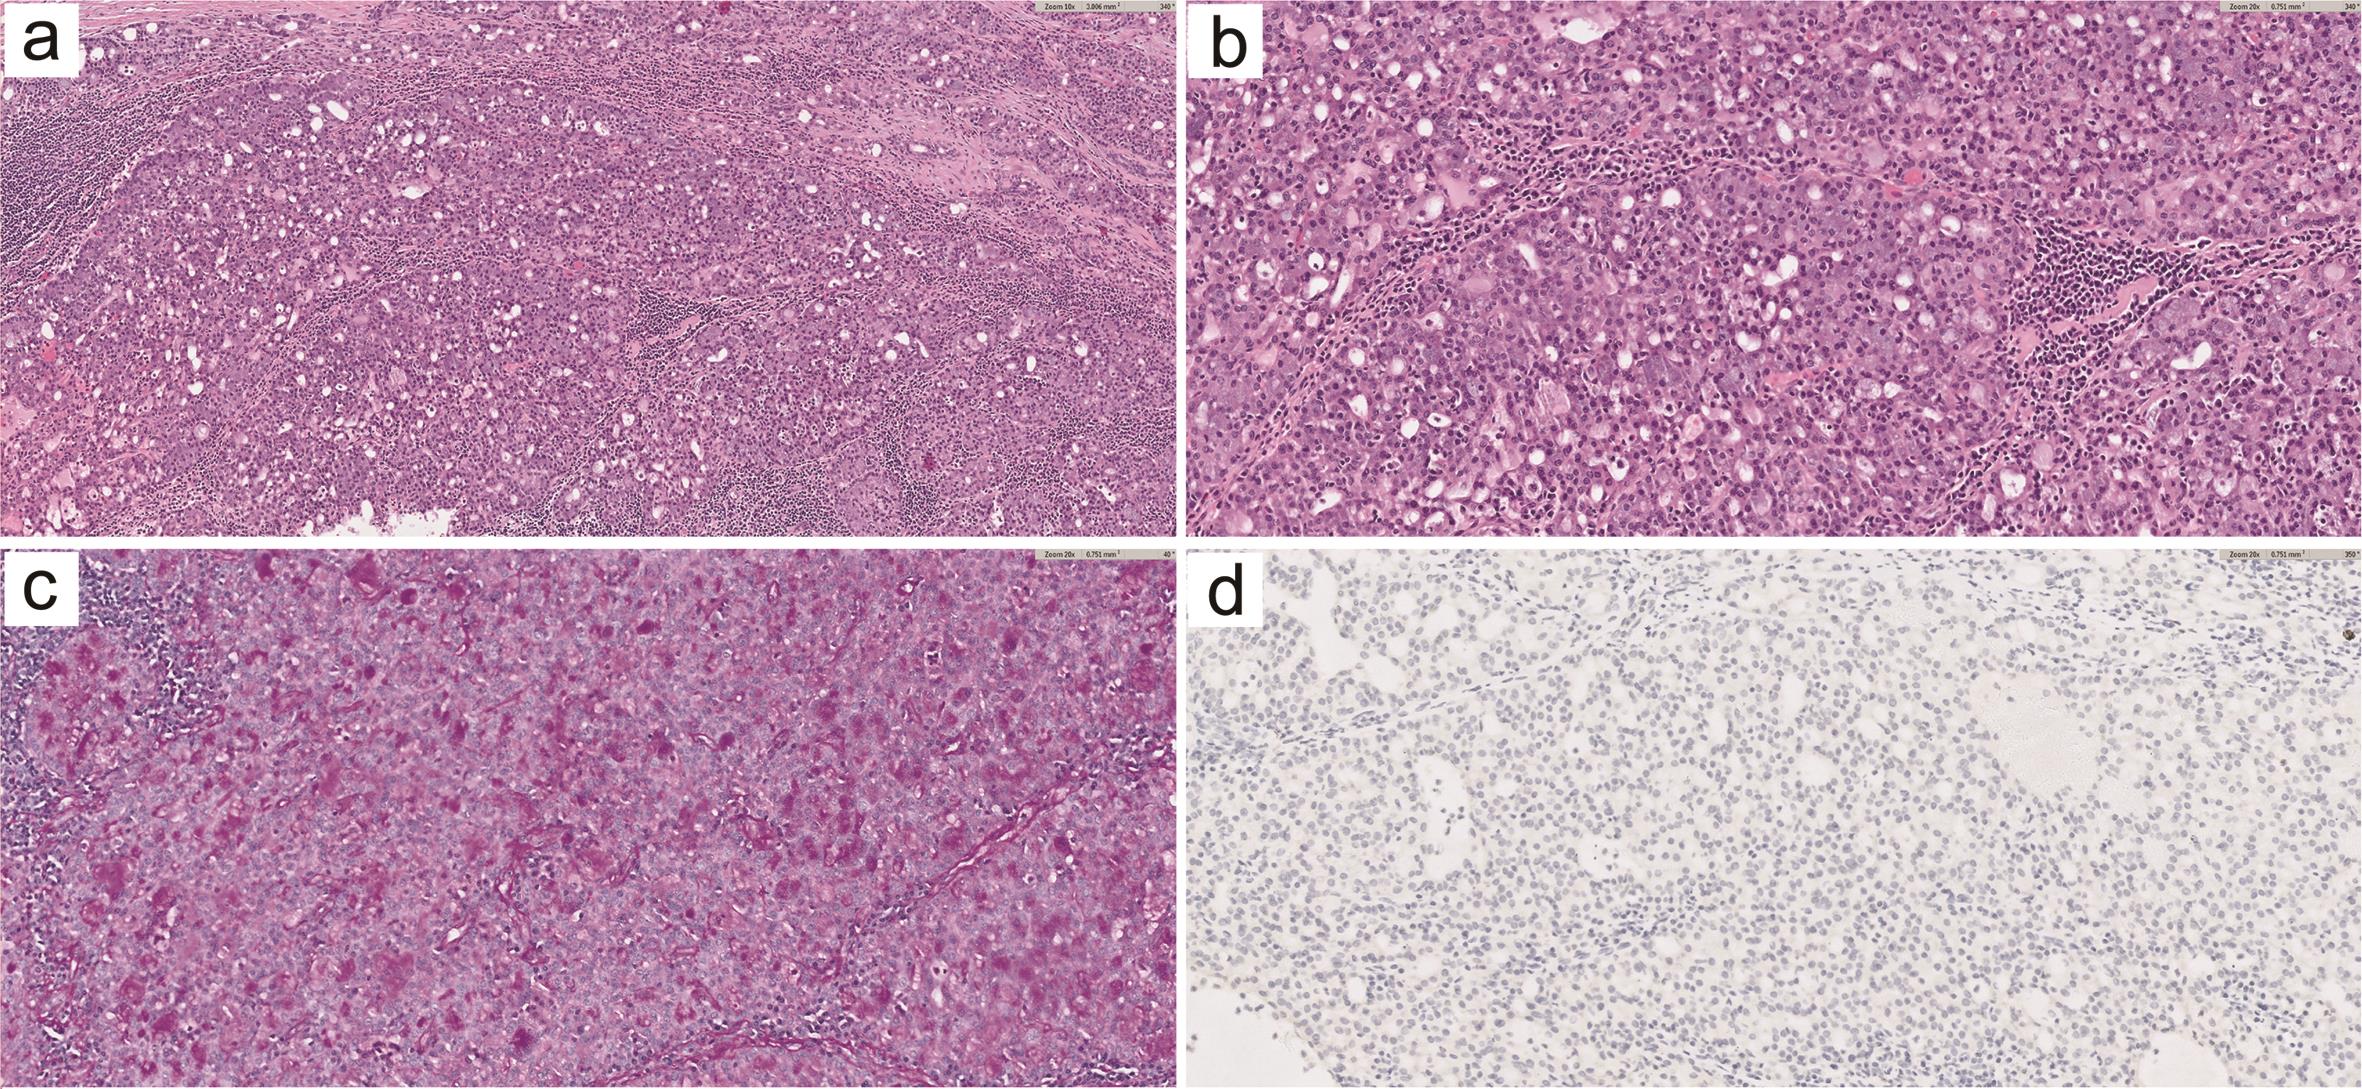 Acinic cell carcinoma of the breast.